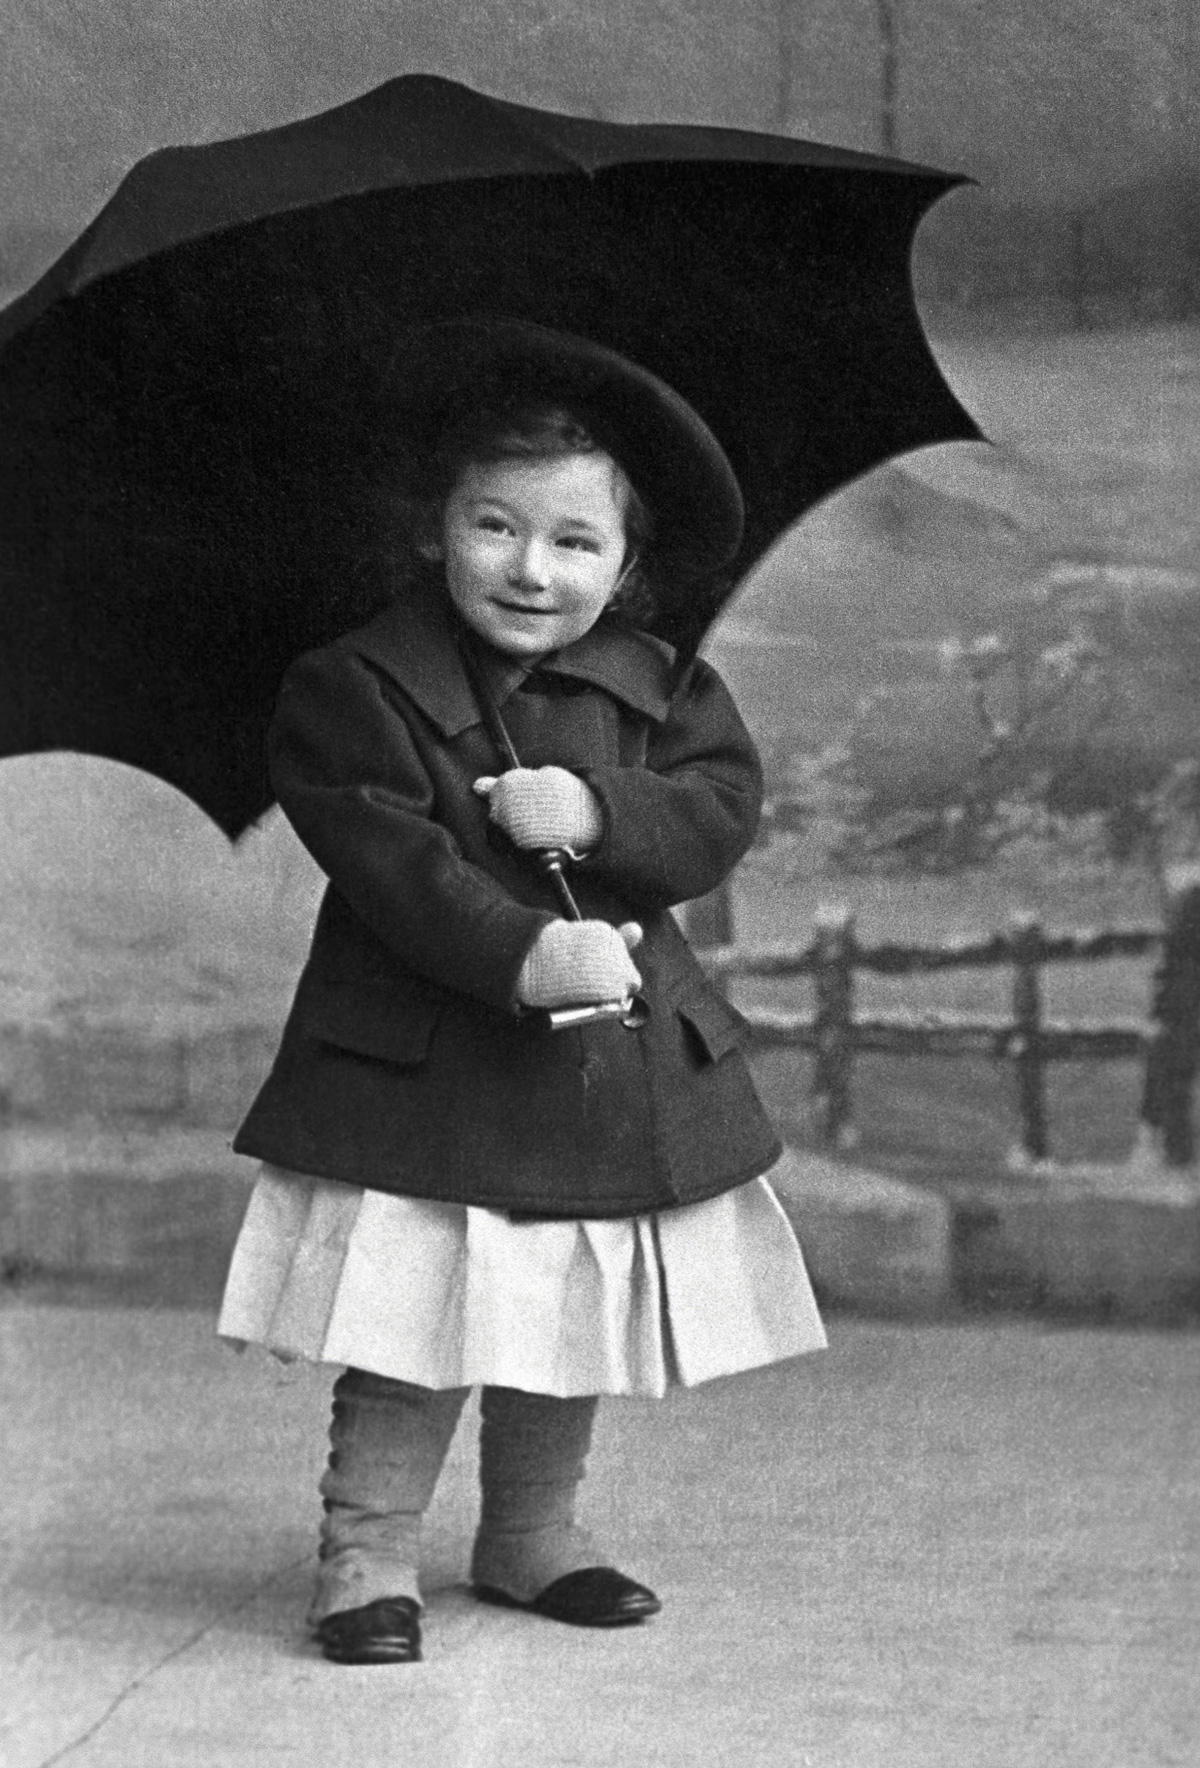 A photograph titled “Portrait of Otto Bettmann—About 2 Years of Age, With an Umbrella.” Available through Corbis for a fee.